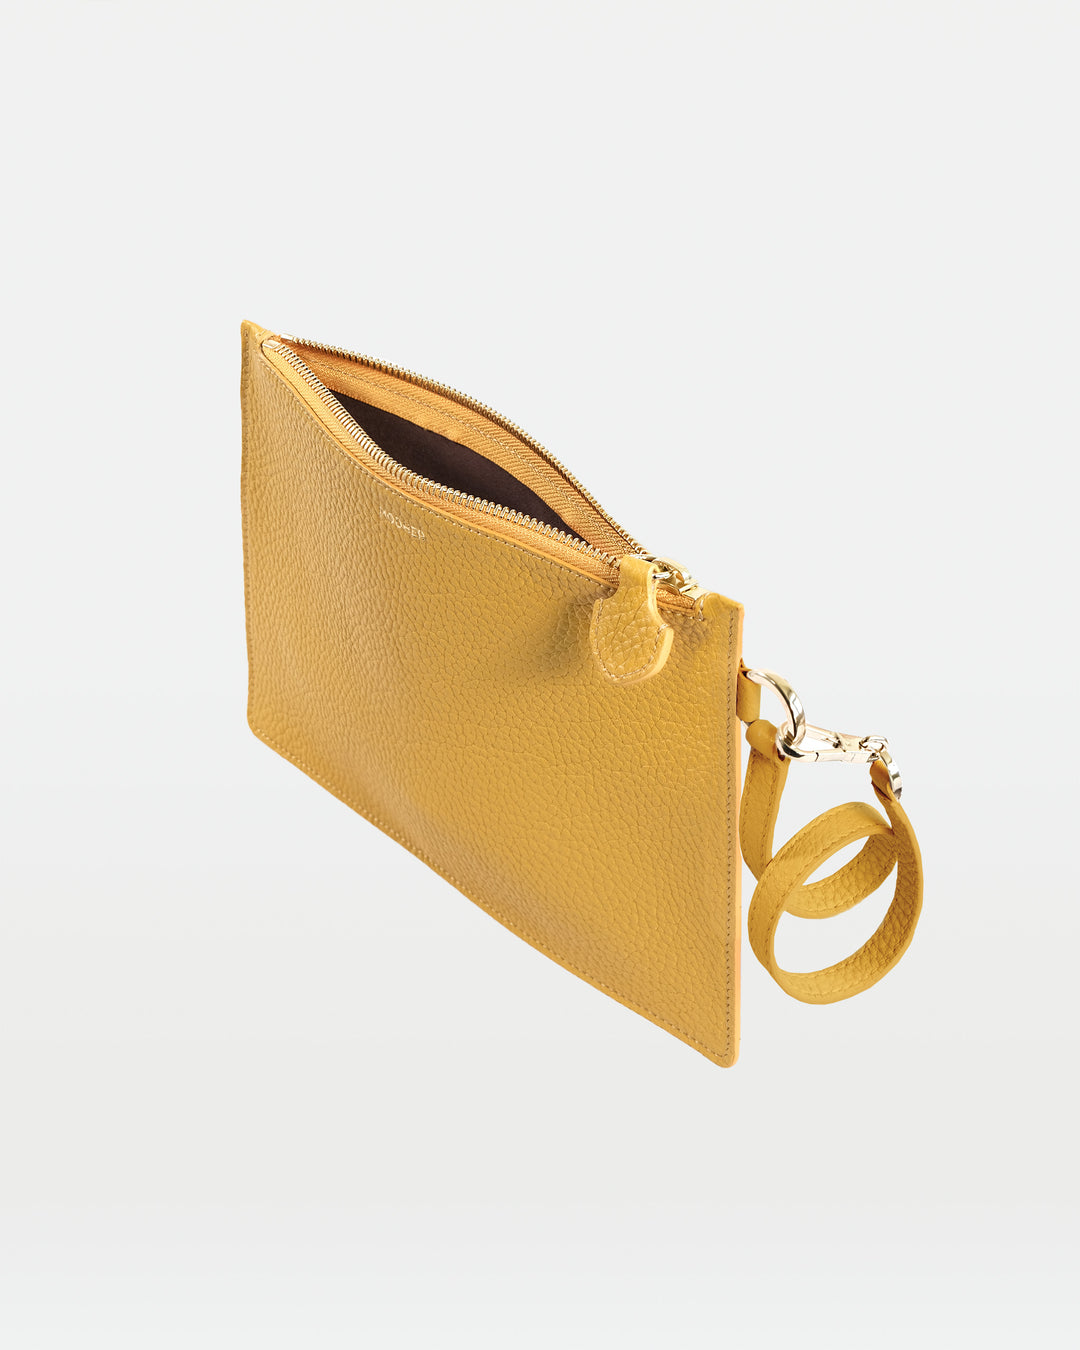 MODHER Wristlet clutch#color_yellow-and-brown-interior